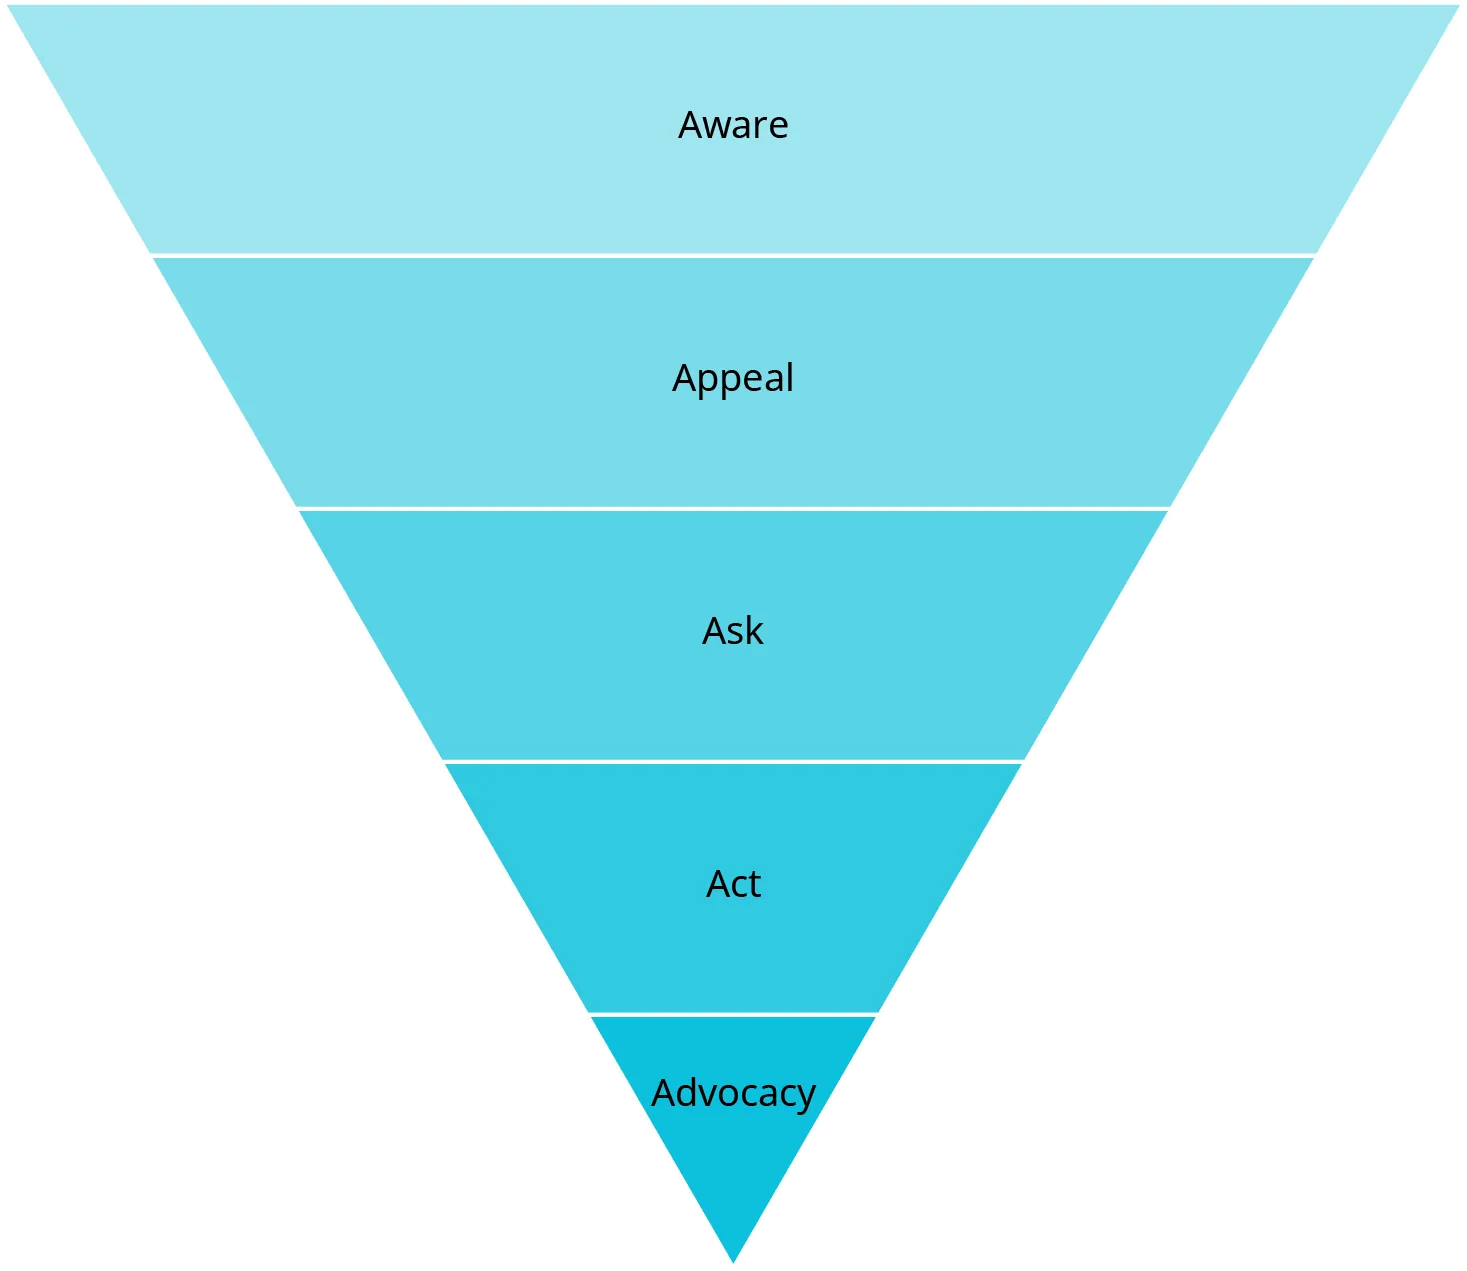 The 5 A framework is shown as a triangle pointed down. As you move through the steps, the size of the area of the triangle represented by each step gets smaller. The steps are aware, appeal, ask, act, and advocacy.